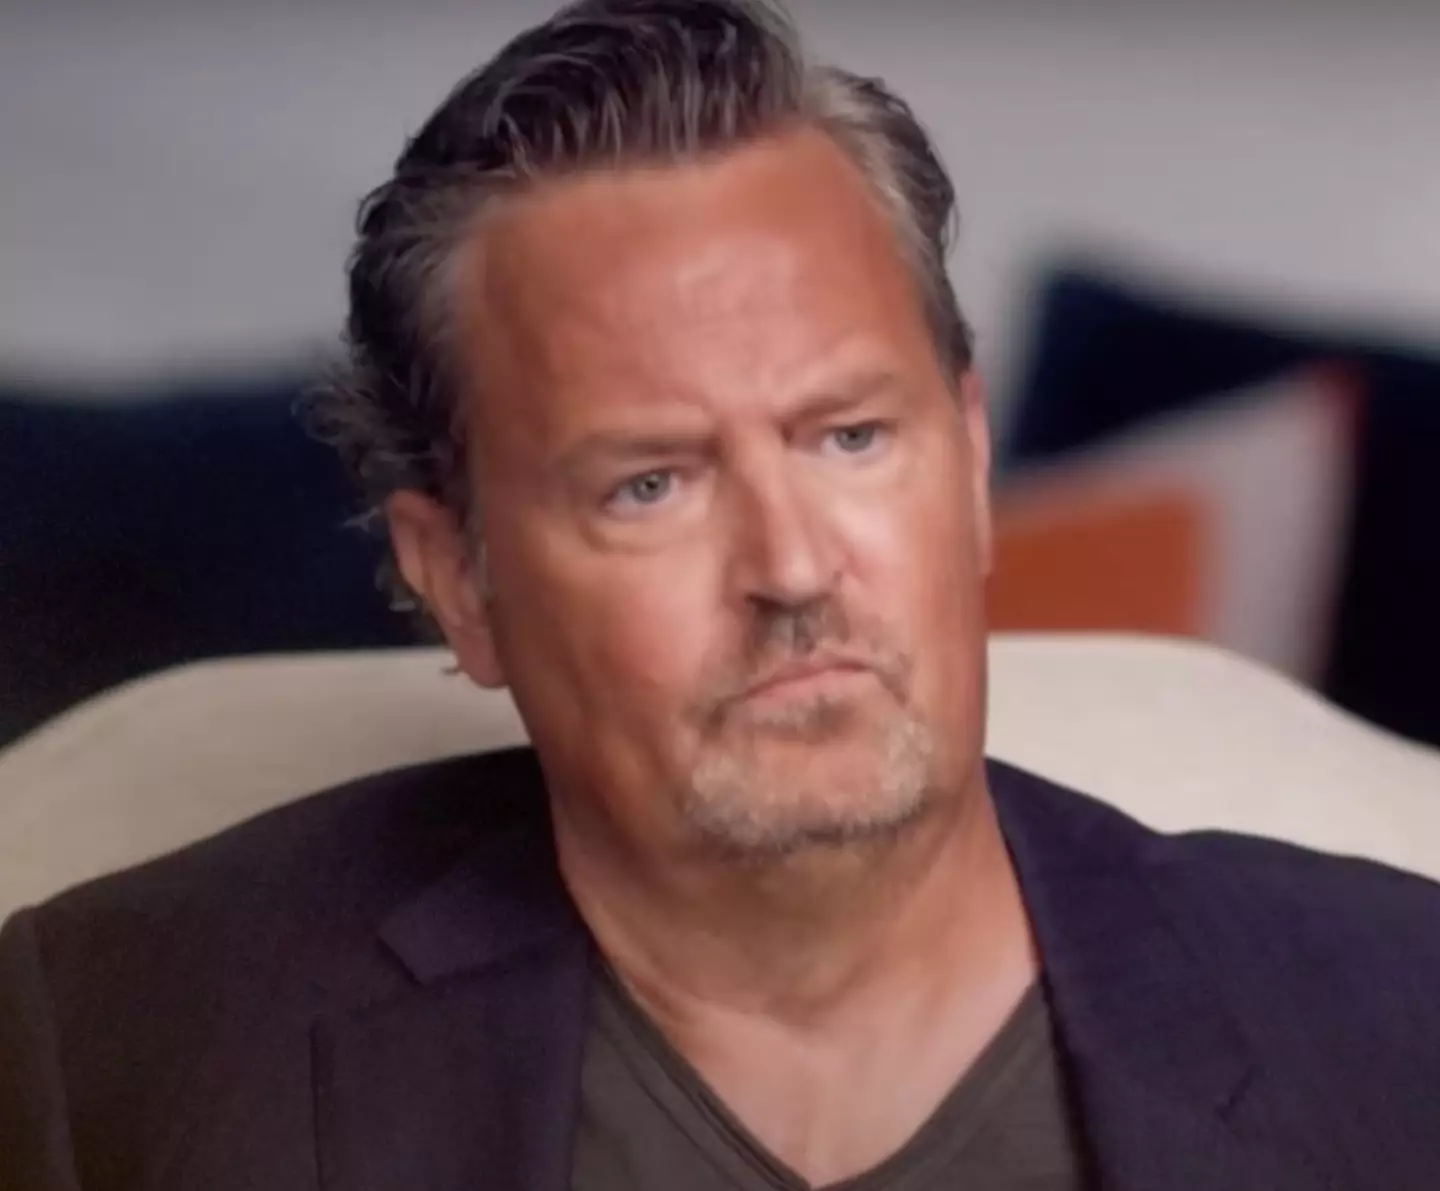 Matthew Perry siad Jennifer Aniston confronted him about his addiction.